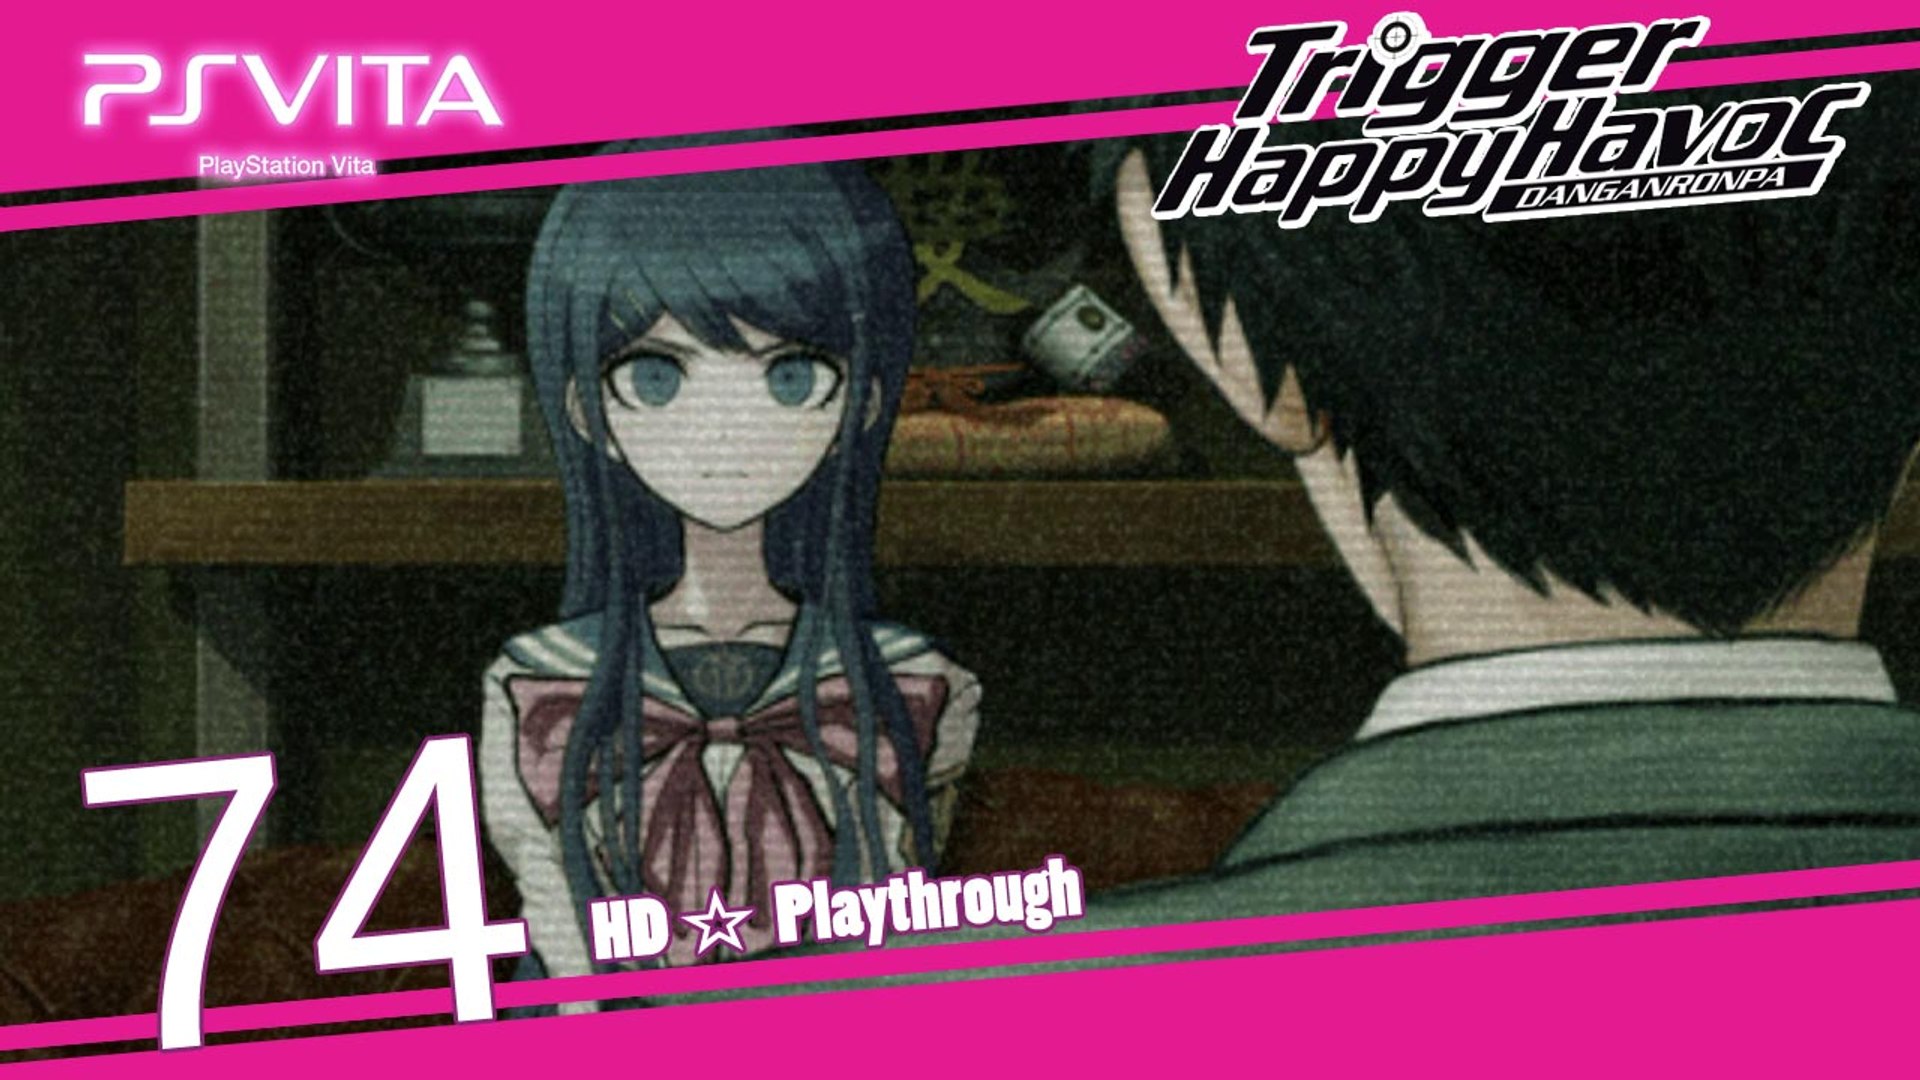 Danganronpa Trigger Happy Havoc Psv Pt 74 Chapter 6 Ultimate Pain Ultimate Suffering Ultimate Despair Ultimate Execution Ultimate Death Video Dailymotion